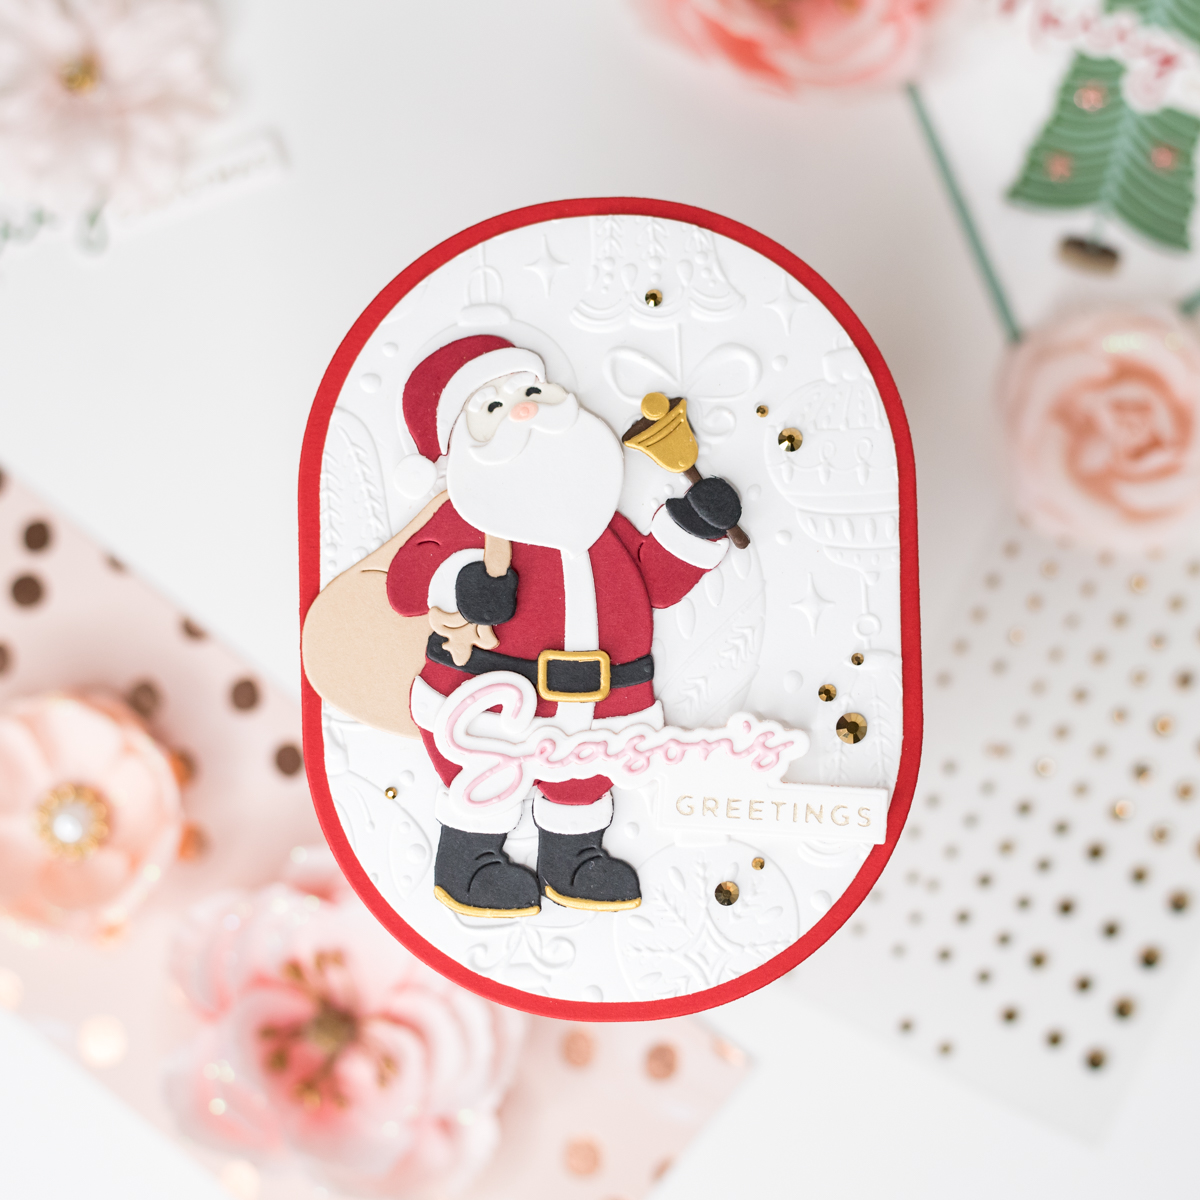 Santa with Gifts Christmas Wax Seal Stamp - Santa Claus Head Surrounded by  Gifts - Add Festive Magic to Holiday Cards and Gifts with Our Unique Seal